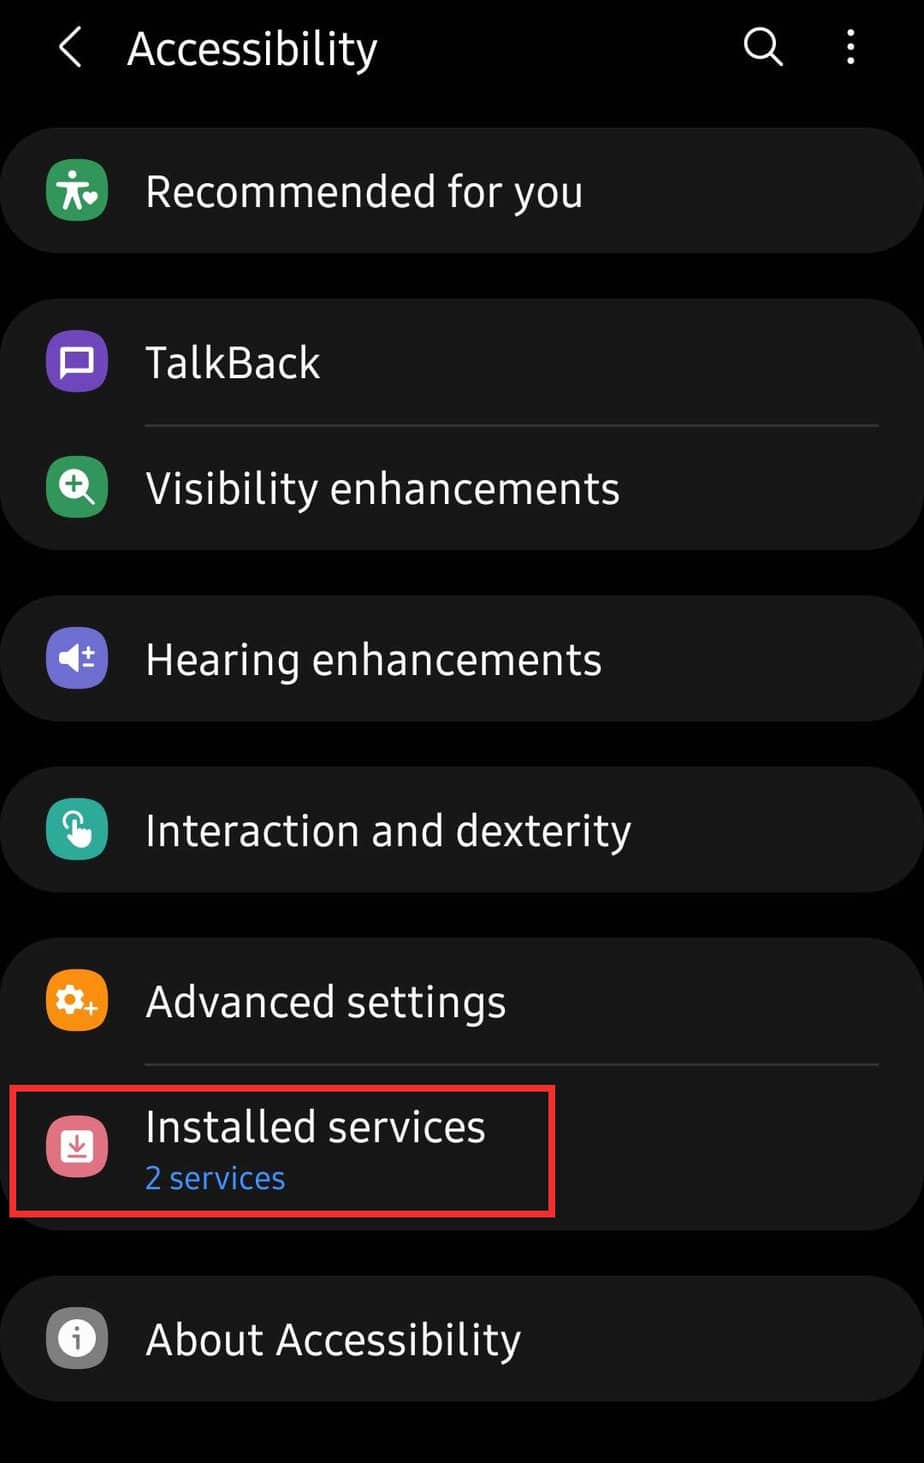 tap-on-installed-services